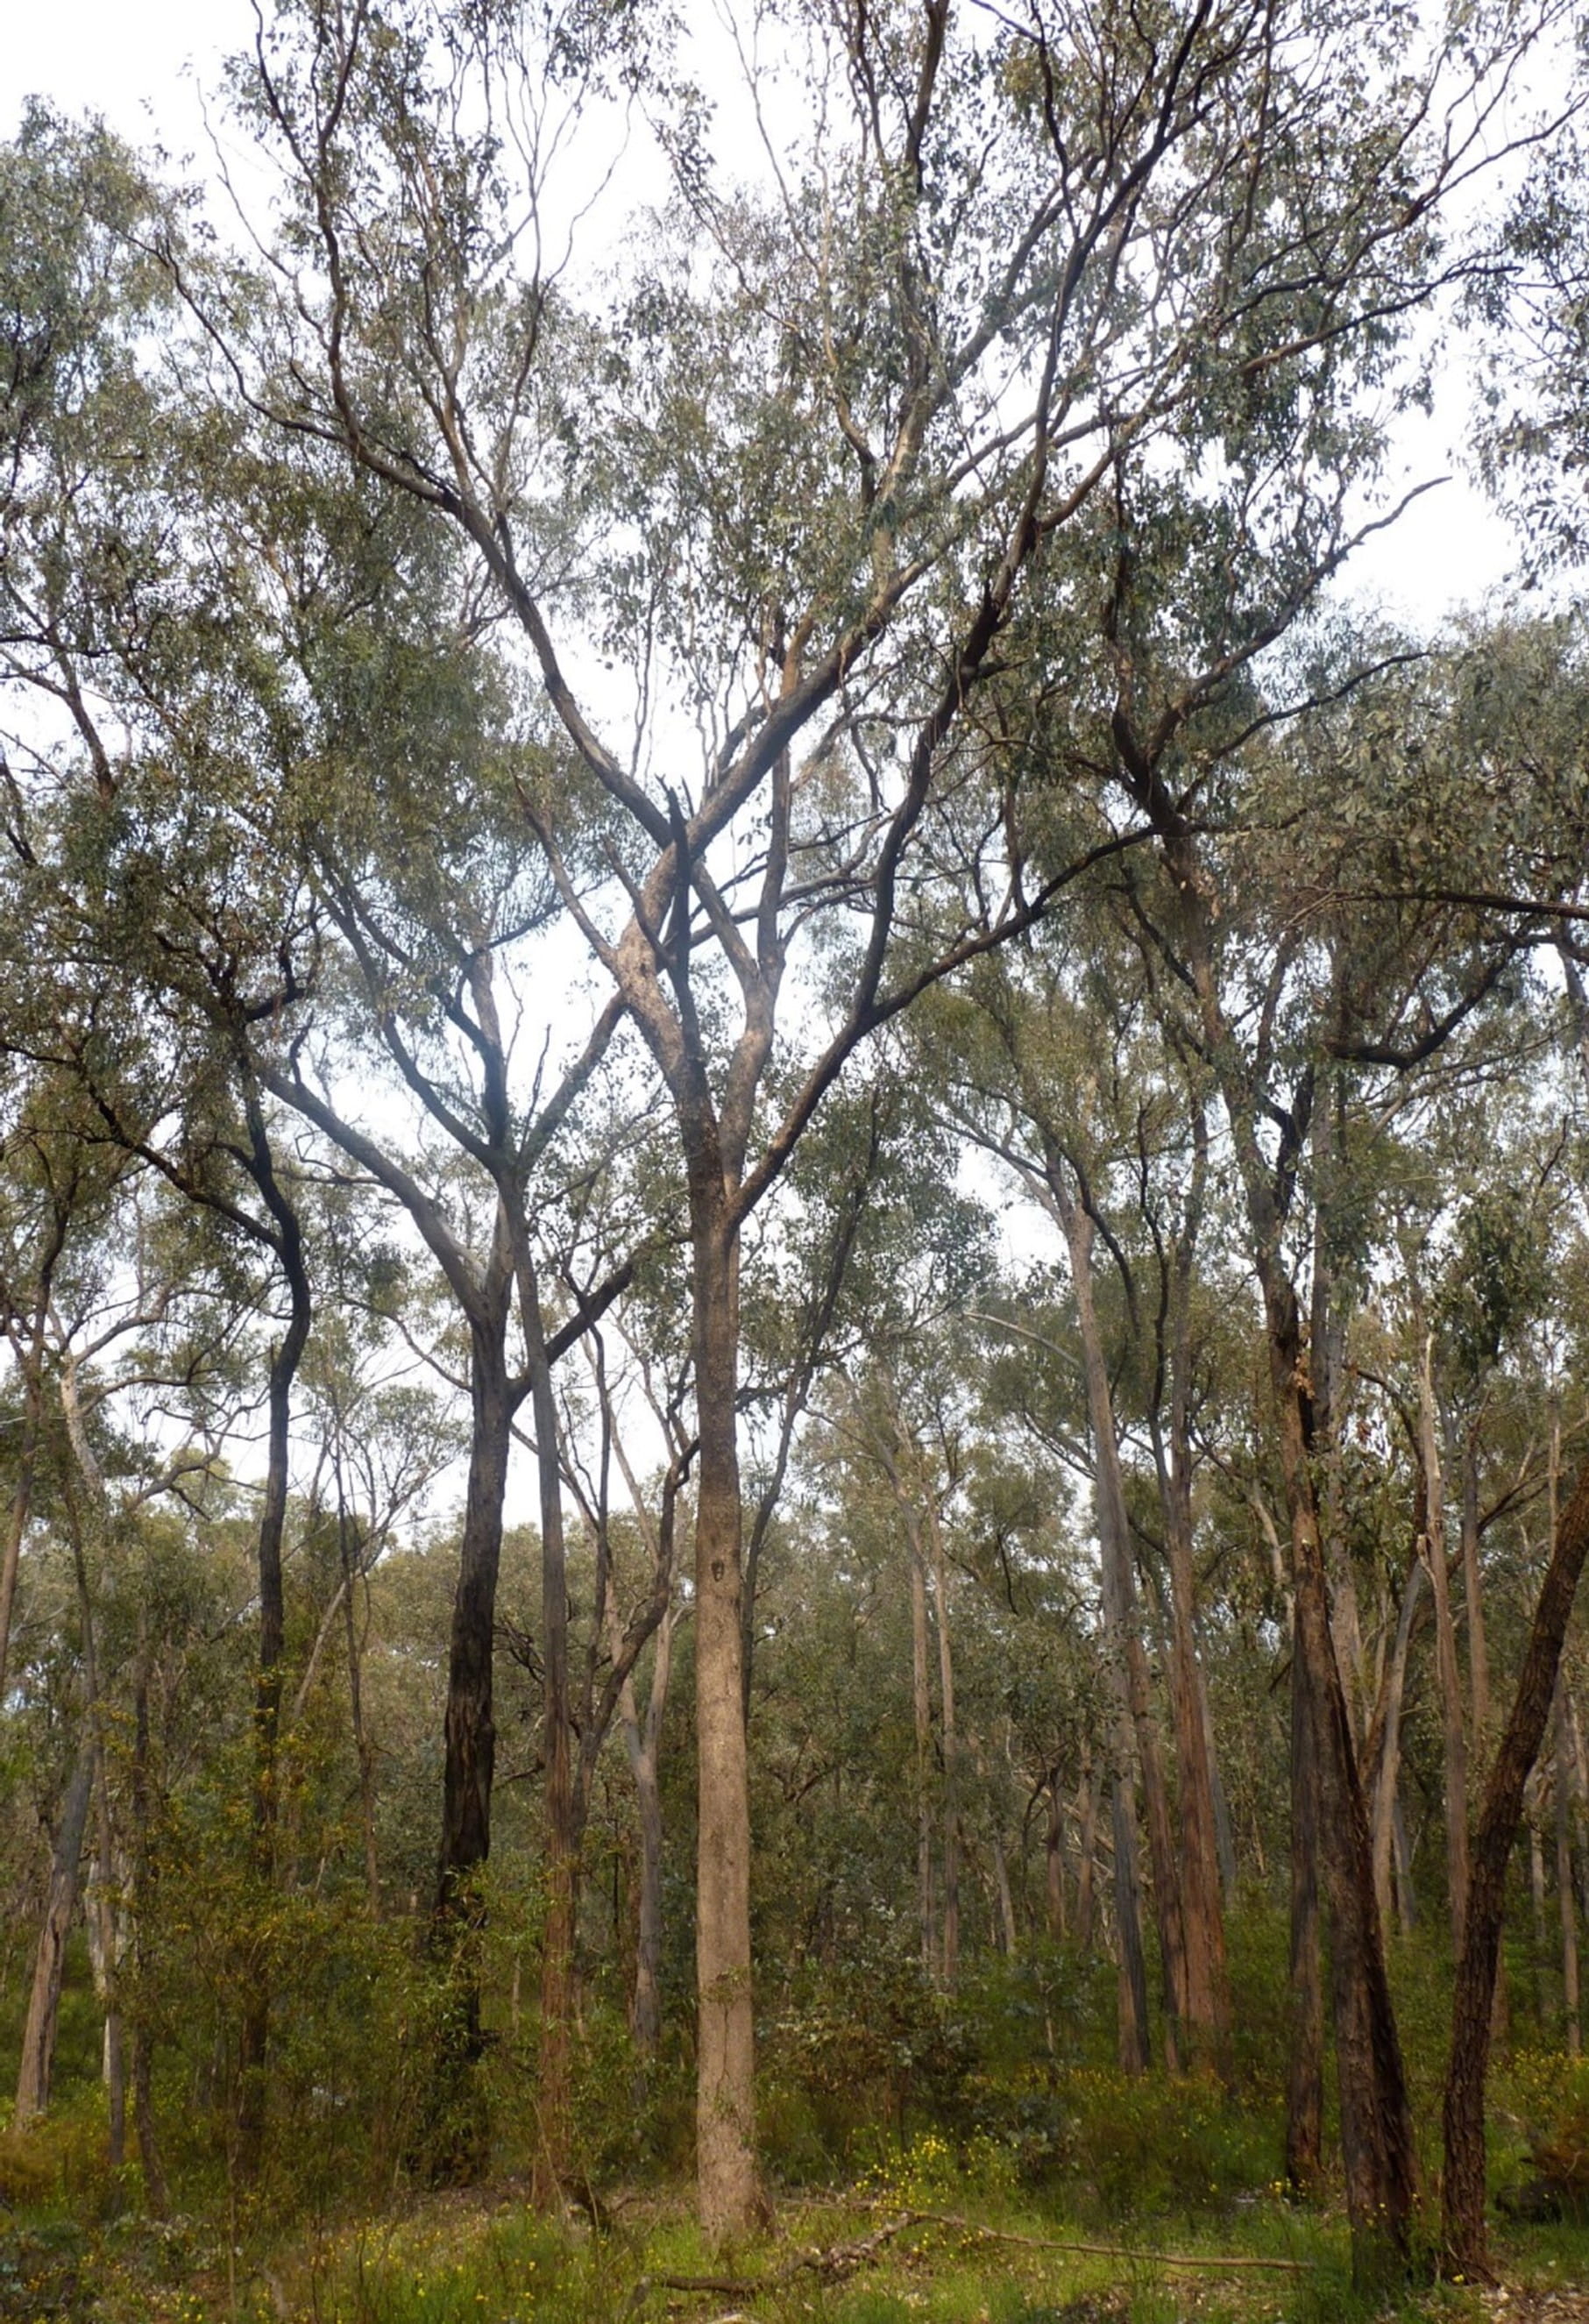 The tree has grey bark and is interspersed amongst different varieties of iron bark species behind it in the forest